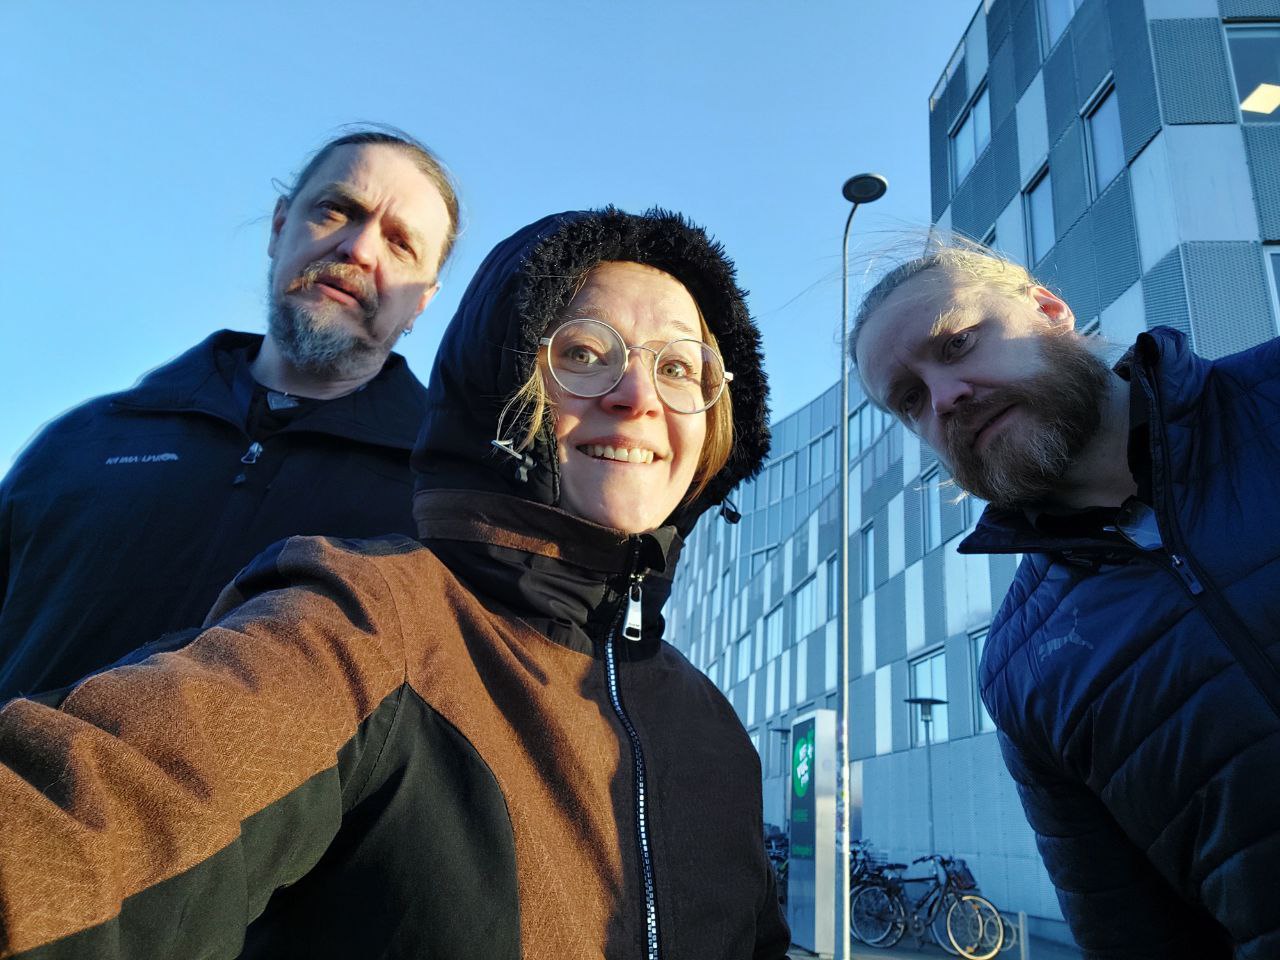 In the close-up, two men and a smiling woman in a hood stand in front of the building. Blue sky in the background.